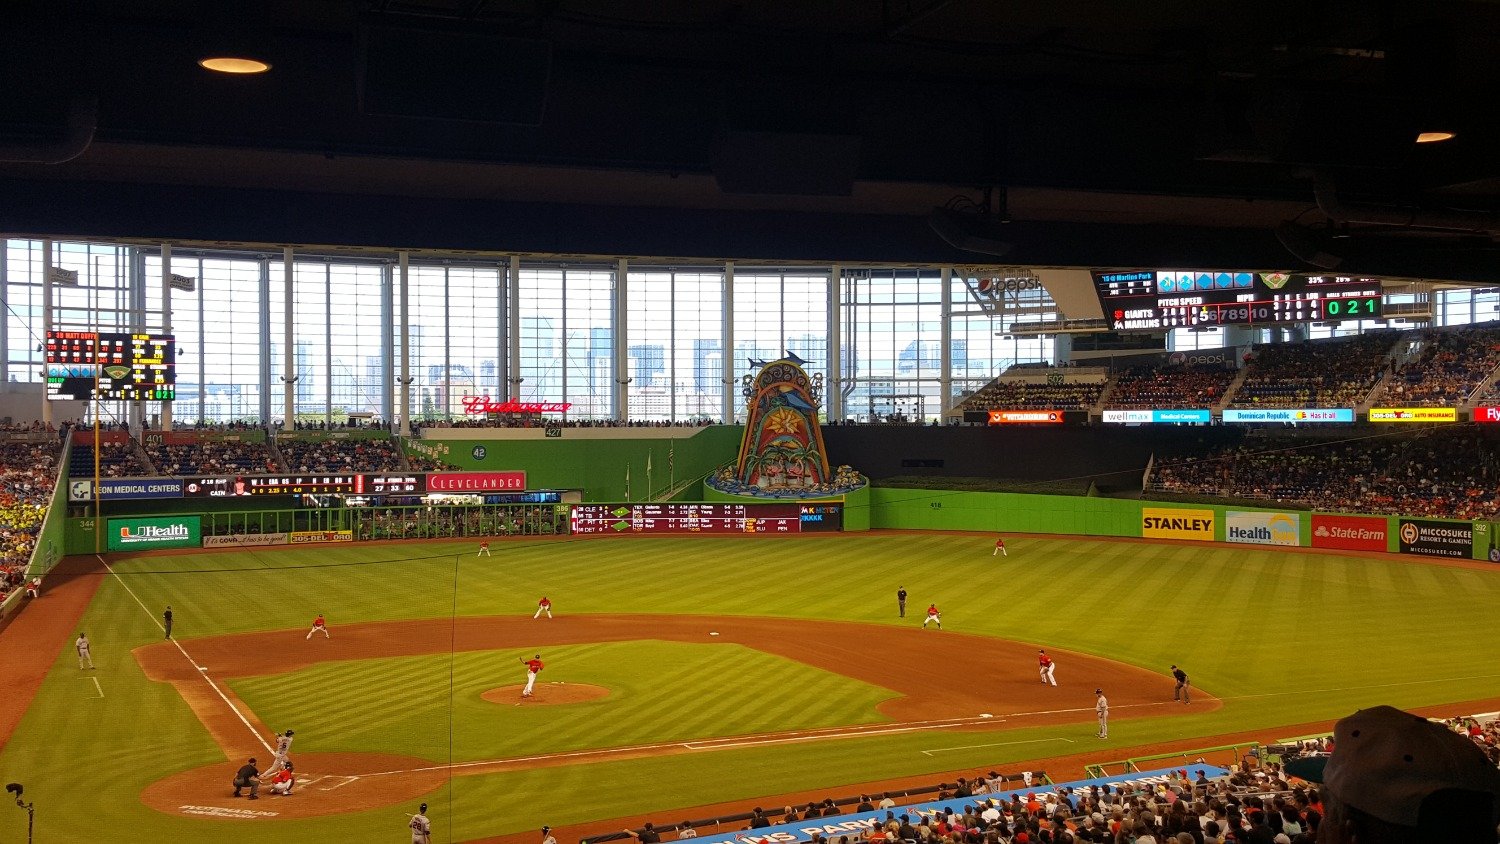 The Clevelander makes the jump from South Beach to ballpark